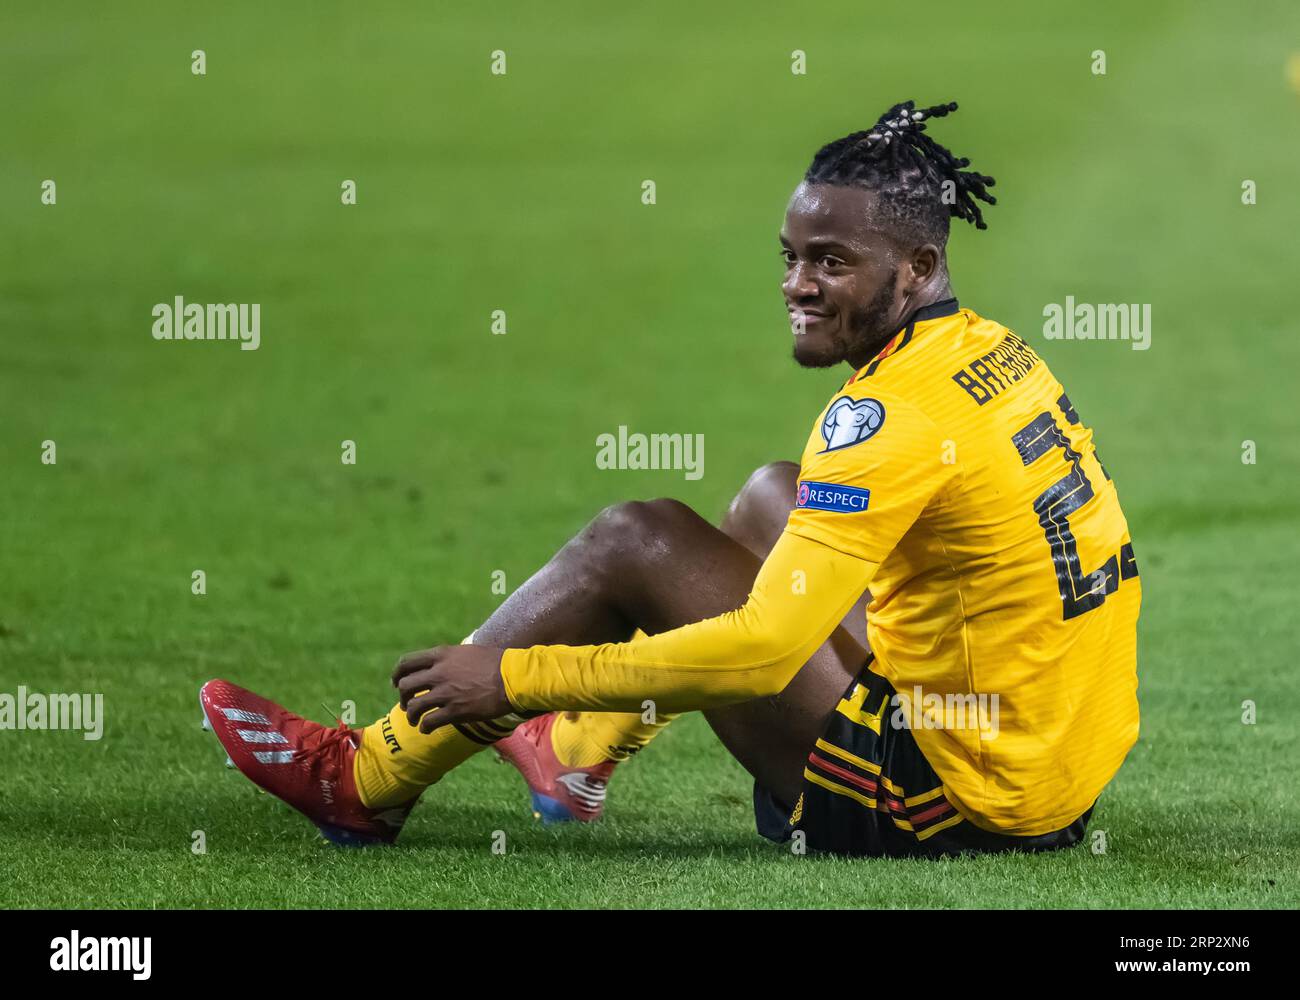 Brussels, Belgium - March 21, 2019. Belgium national football team striker Michy Batshuayi sitting on the pitch after a foul was committed on him duri Stock Photo